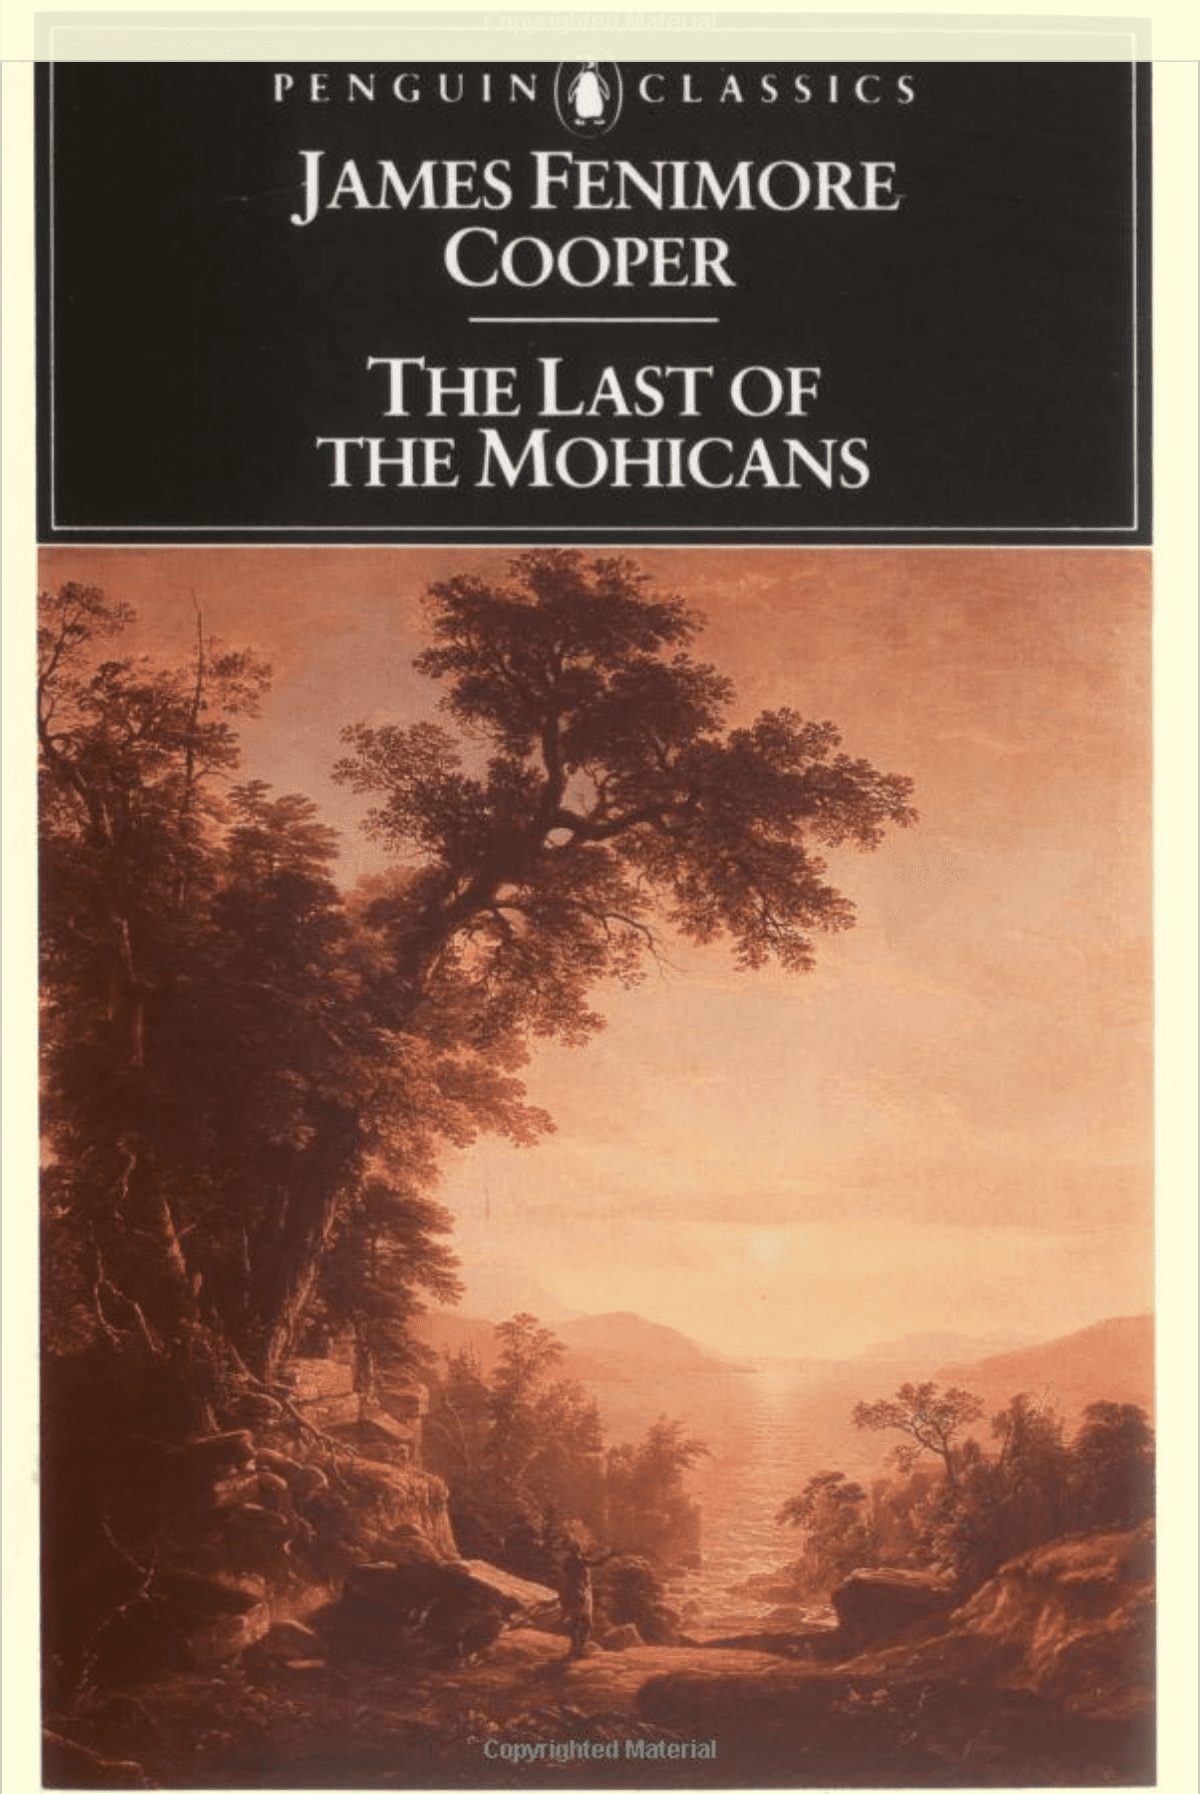 the last of the mohicans book review